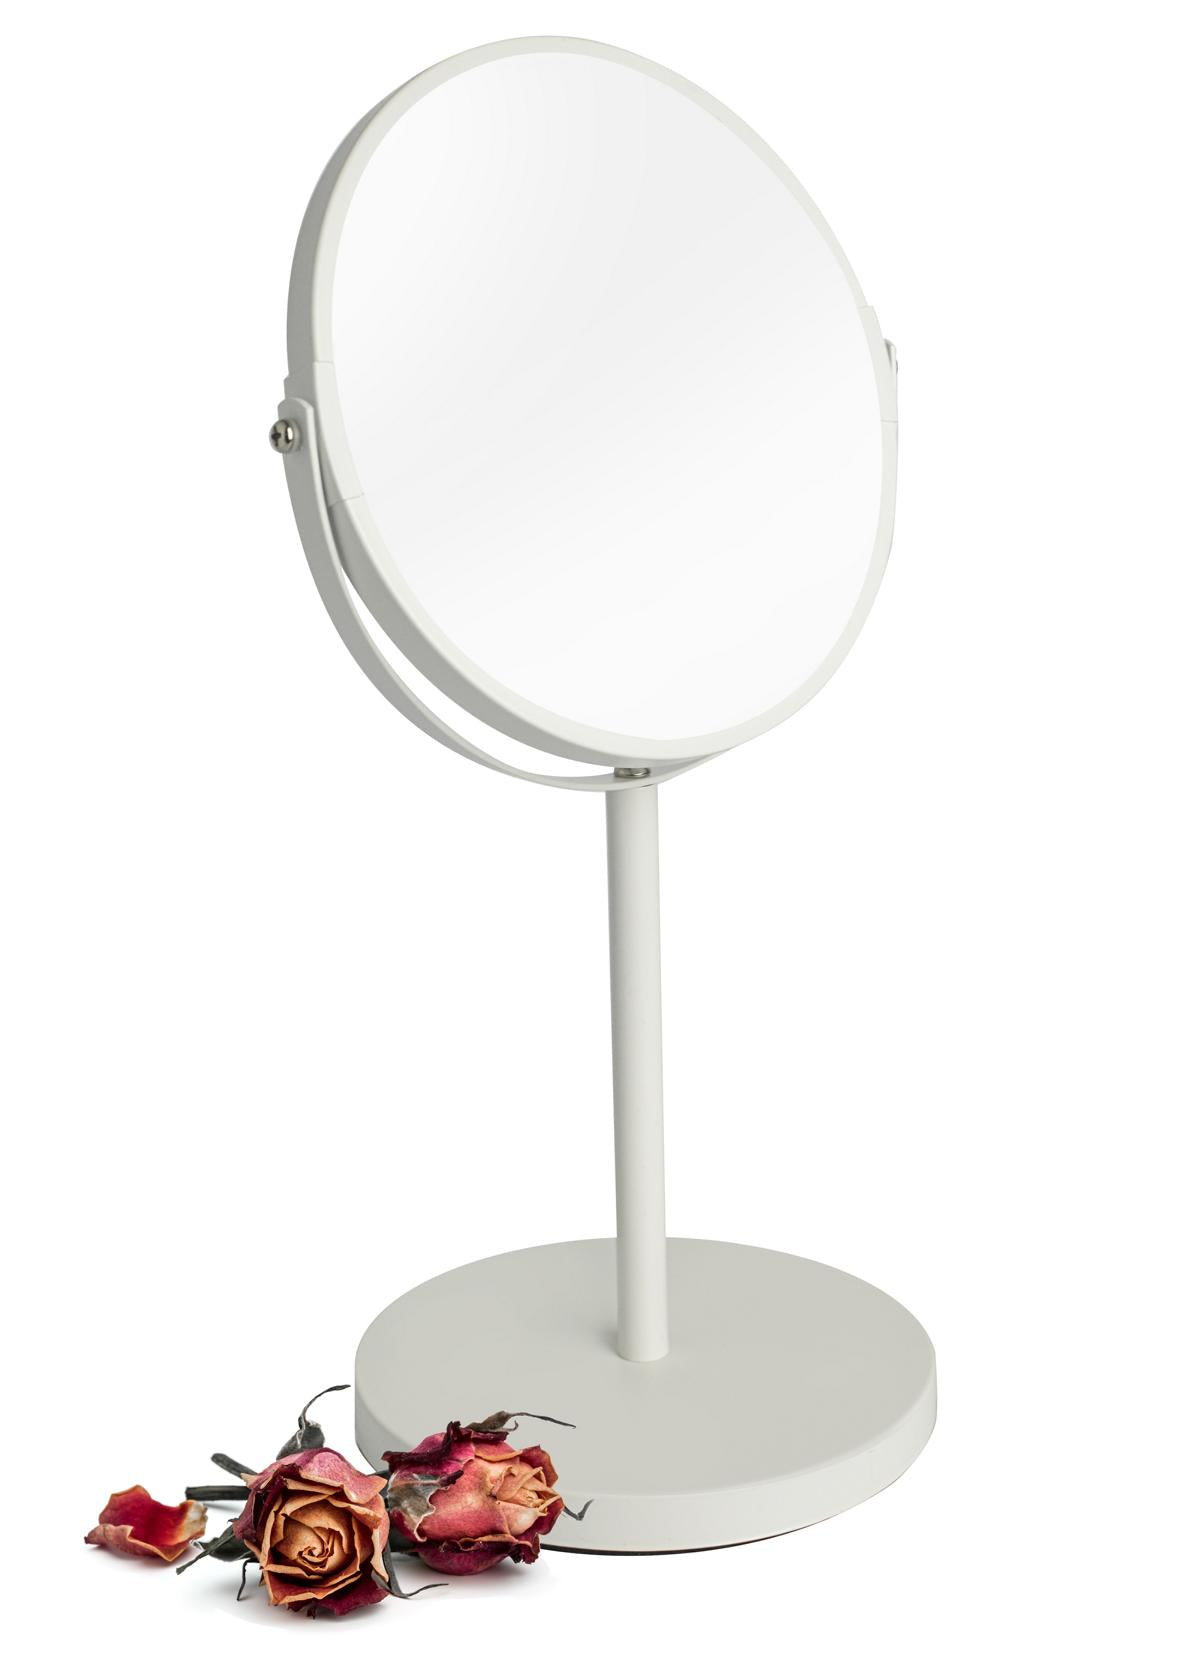 Make-up mirror, cosmetic mirror, shaving mirror, standing mirror, magnification white